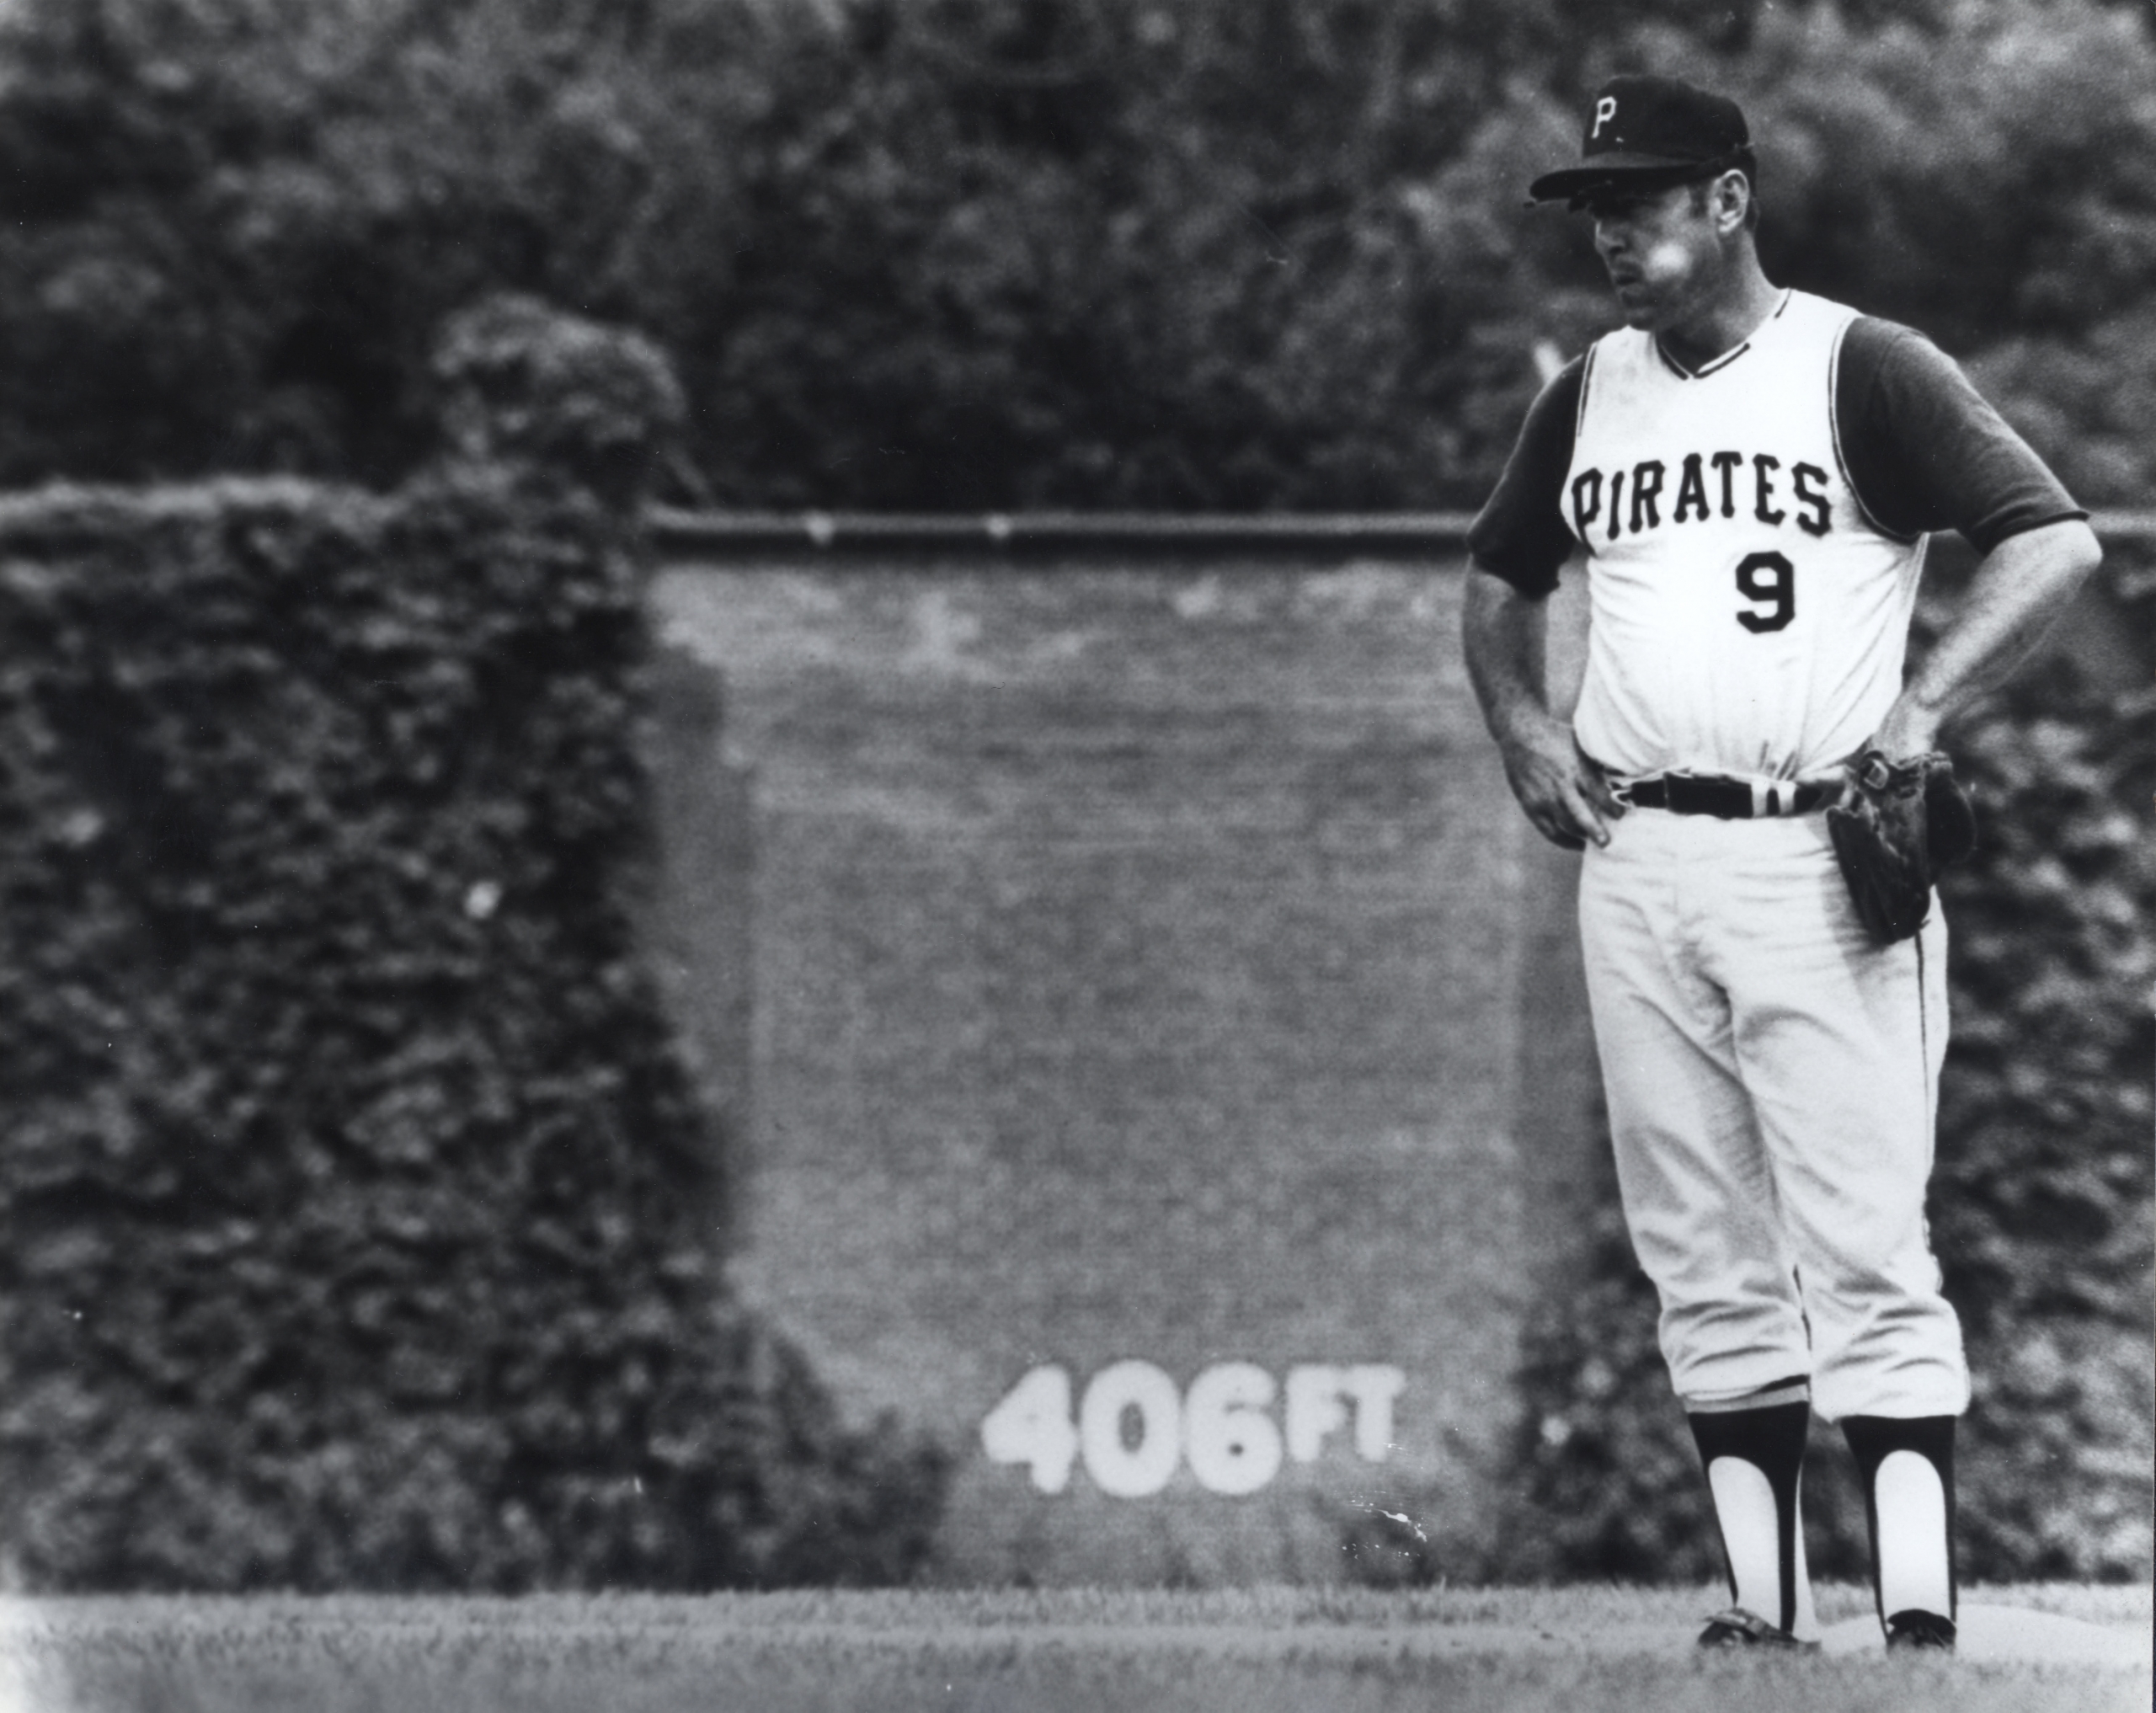 Pirates Hall of Famer is shown during the final game at Pittsburgh's Forbes Field on June 28, 1970.